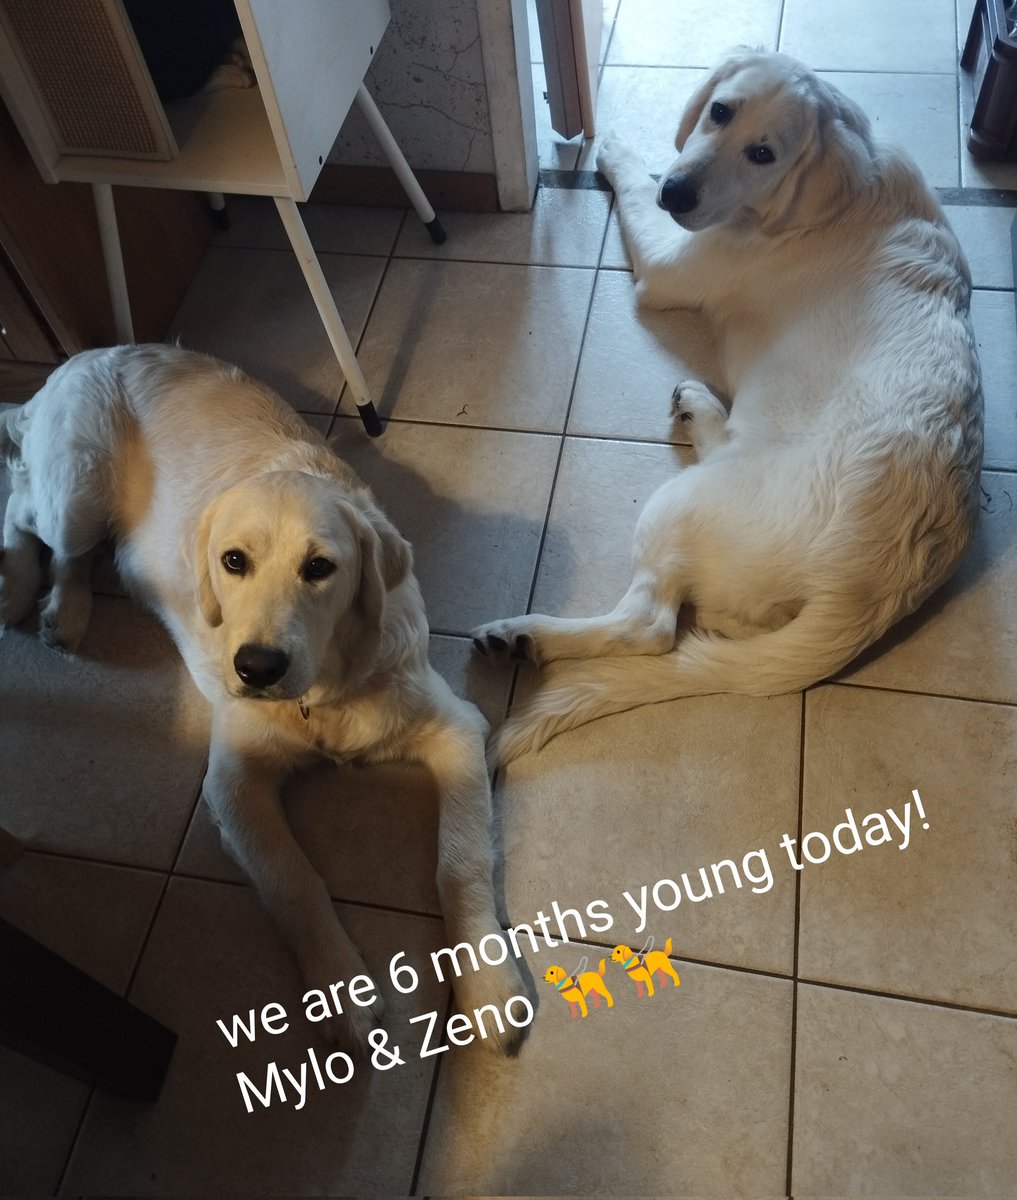 Yay, we are already 6 months old today! 🦮🦮 #puppies #blessthem #goldenretrievers #dogs #brothers #furryfriends #timeflies 🐾🎉 Happy Fursday, everyone!